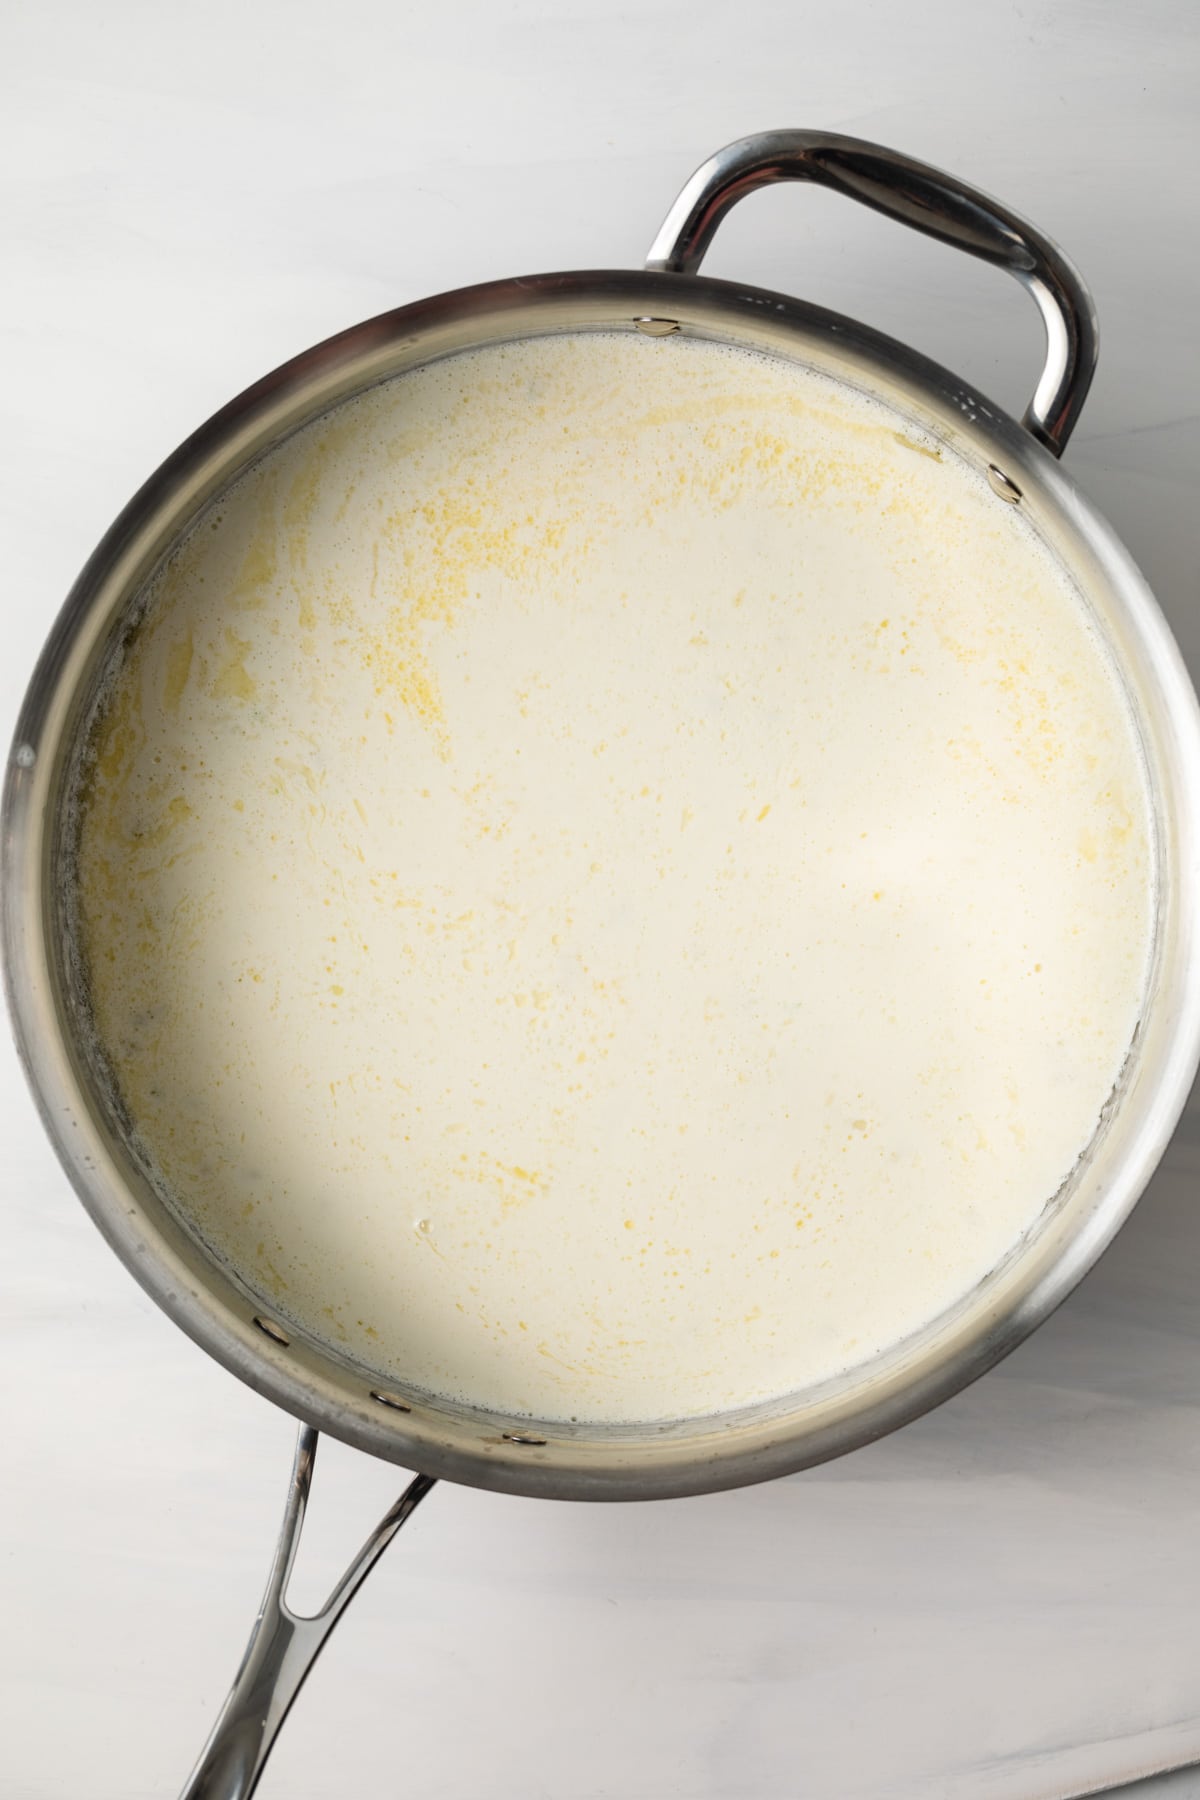 Cream with butter and garlic in a skillet.